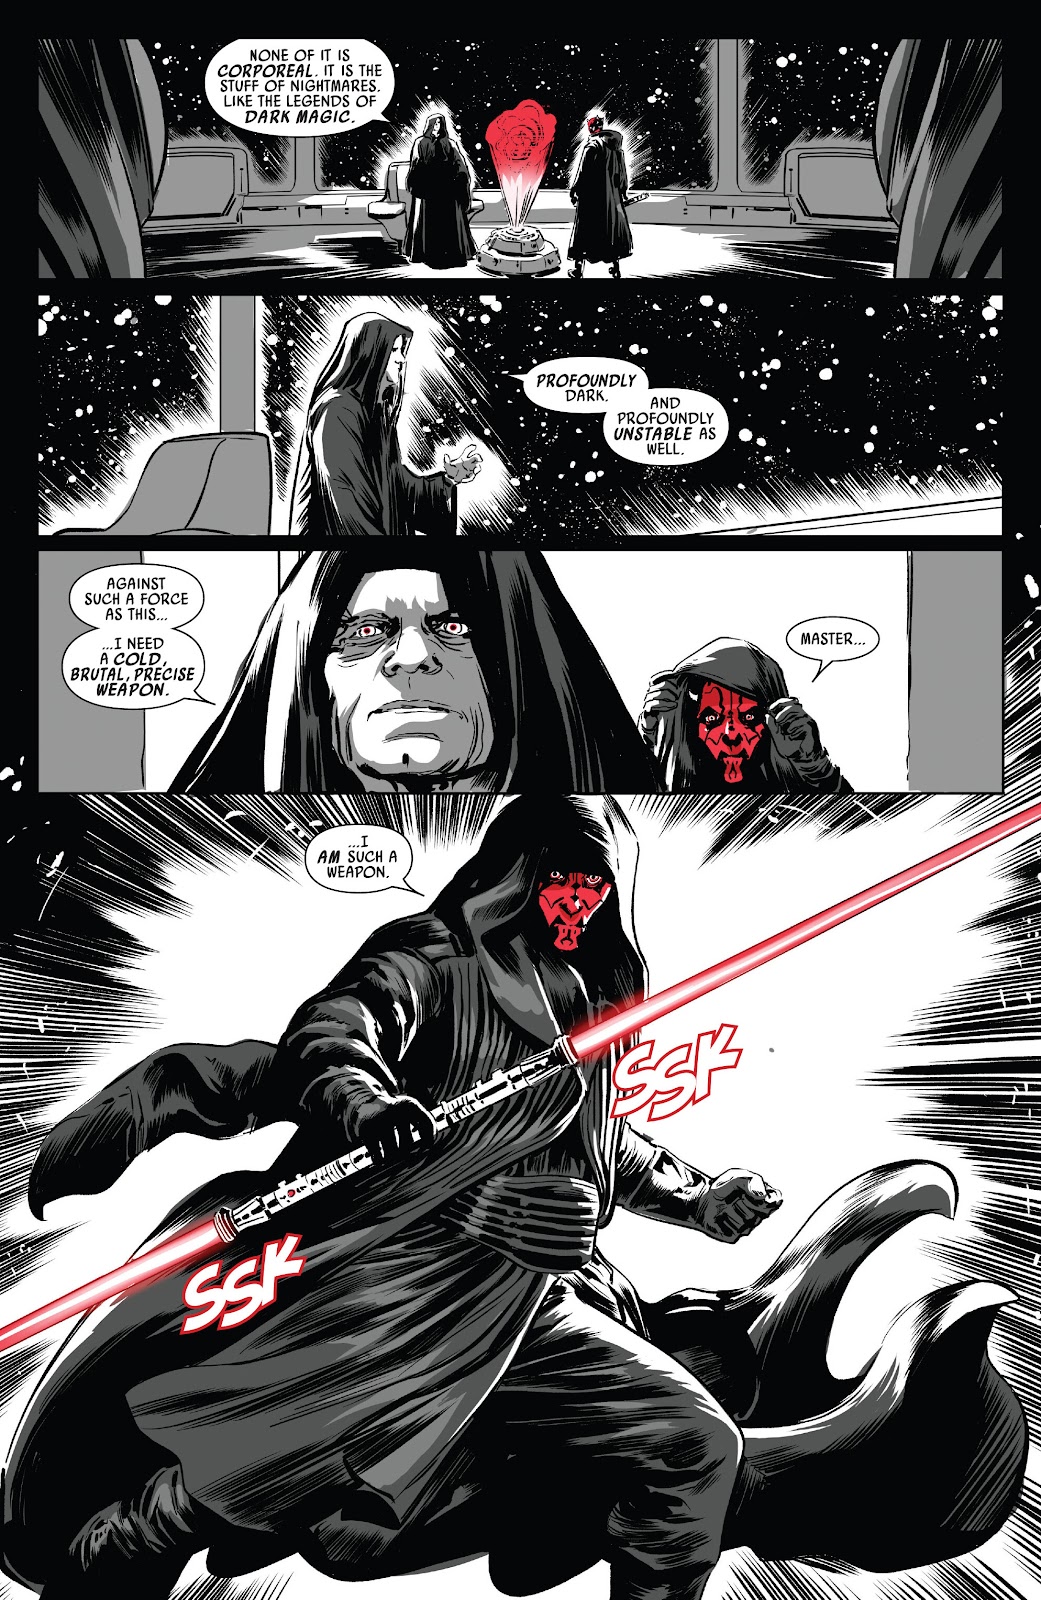 Star Wars: Darth Maul - Black, White & Red issue 1 - Page 5